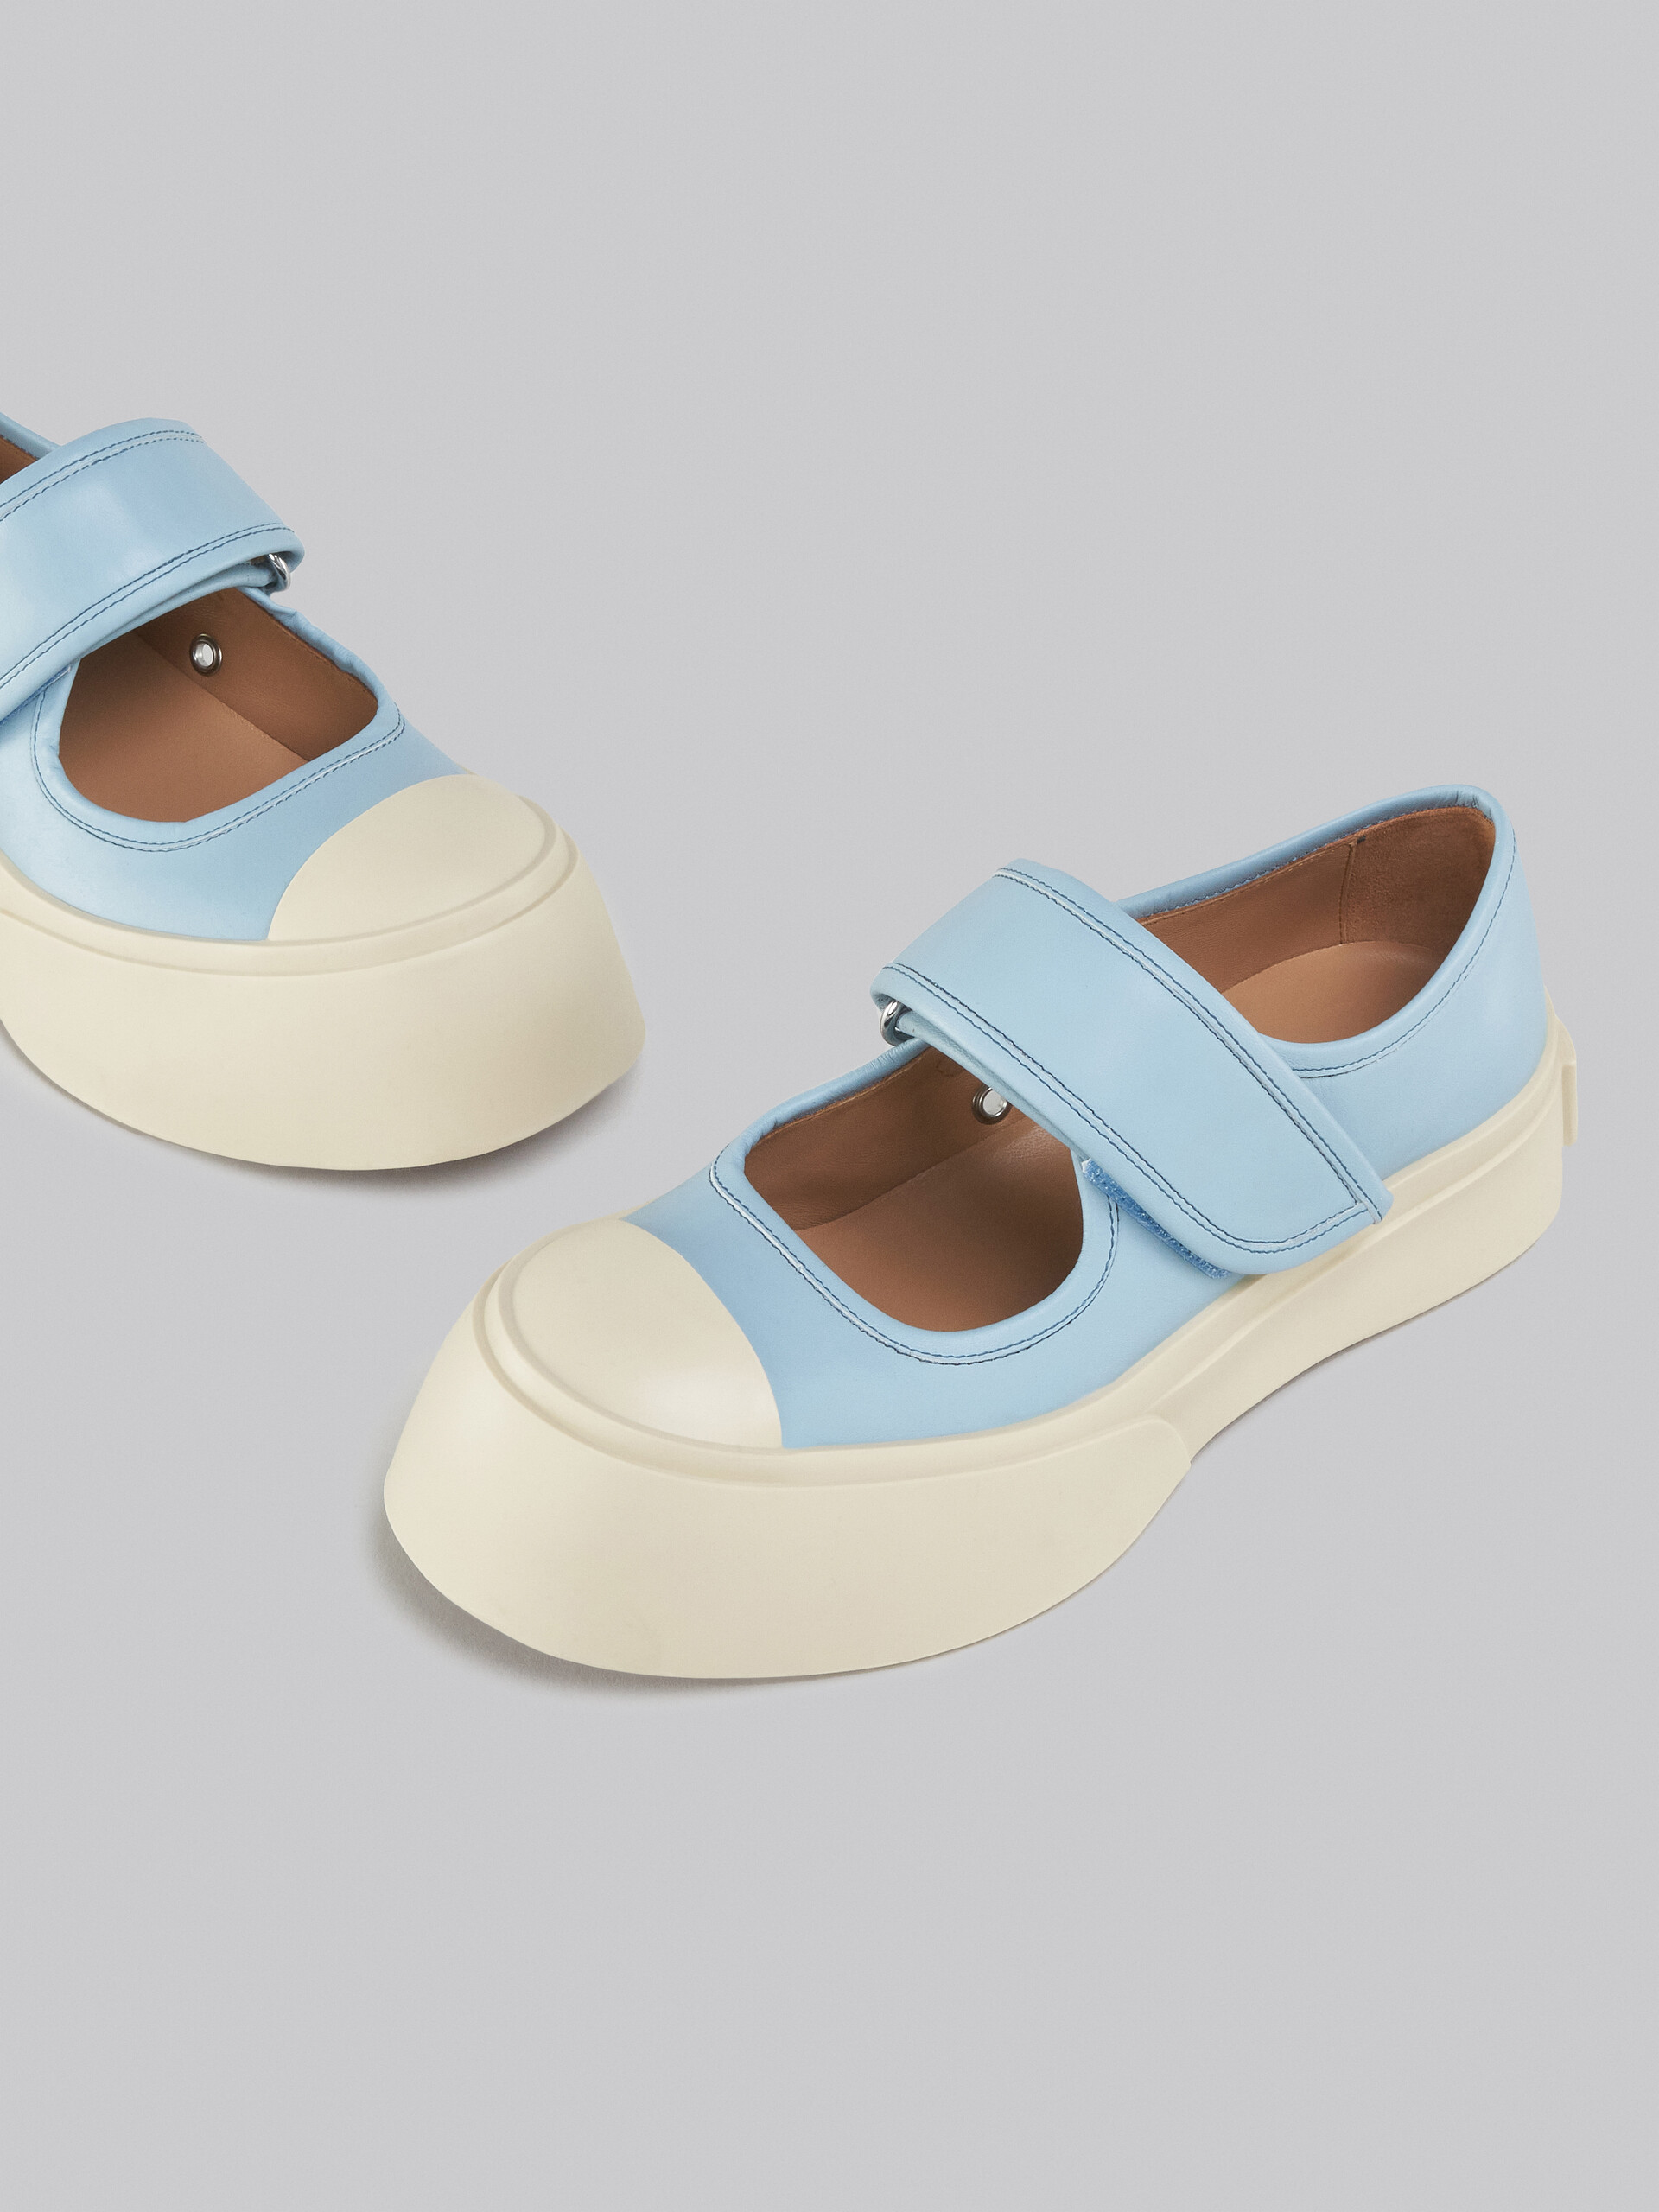 Light blue nappa leather Mary Jane sneaker - Sneakers - Image 5